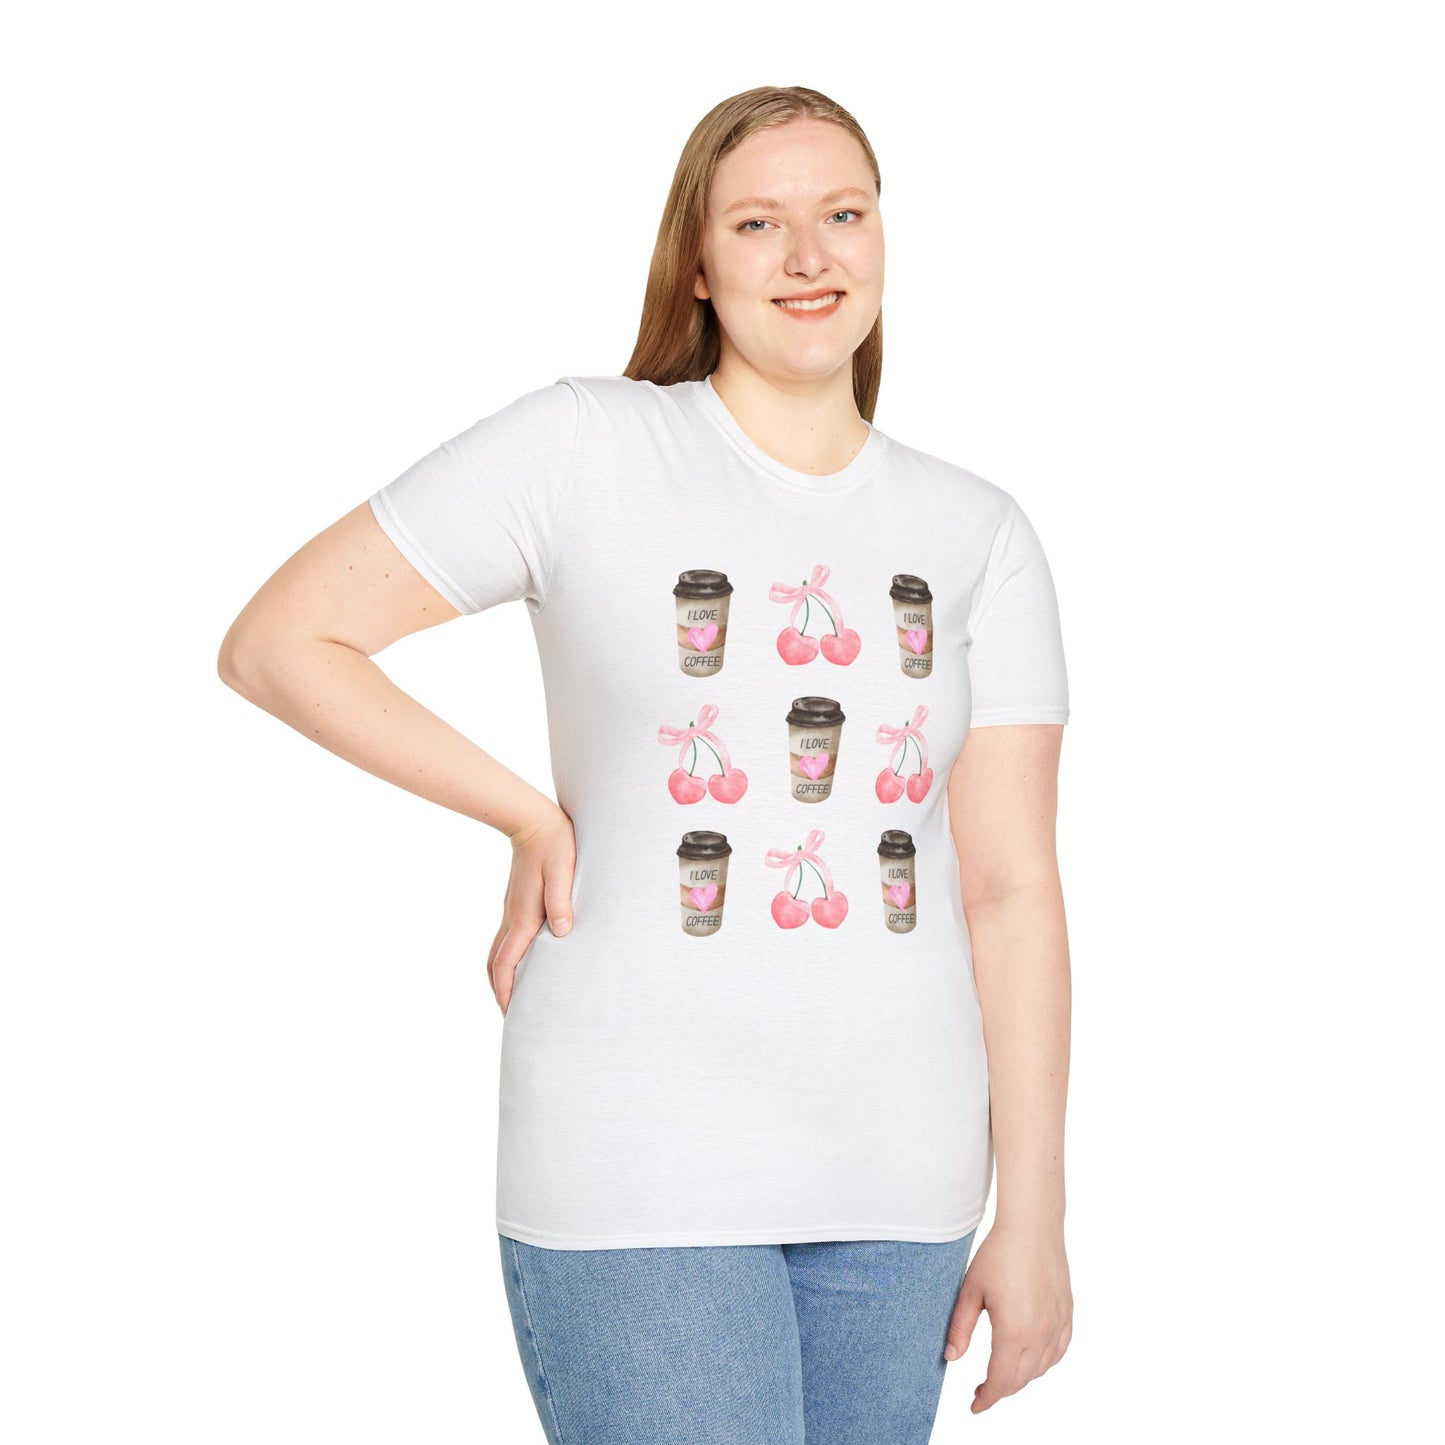 I Love Coffee - Pink Watercolor Coquette Girly Designs - Unisex Softstyle T-Shirt